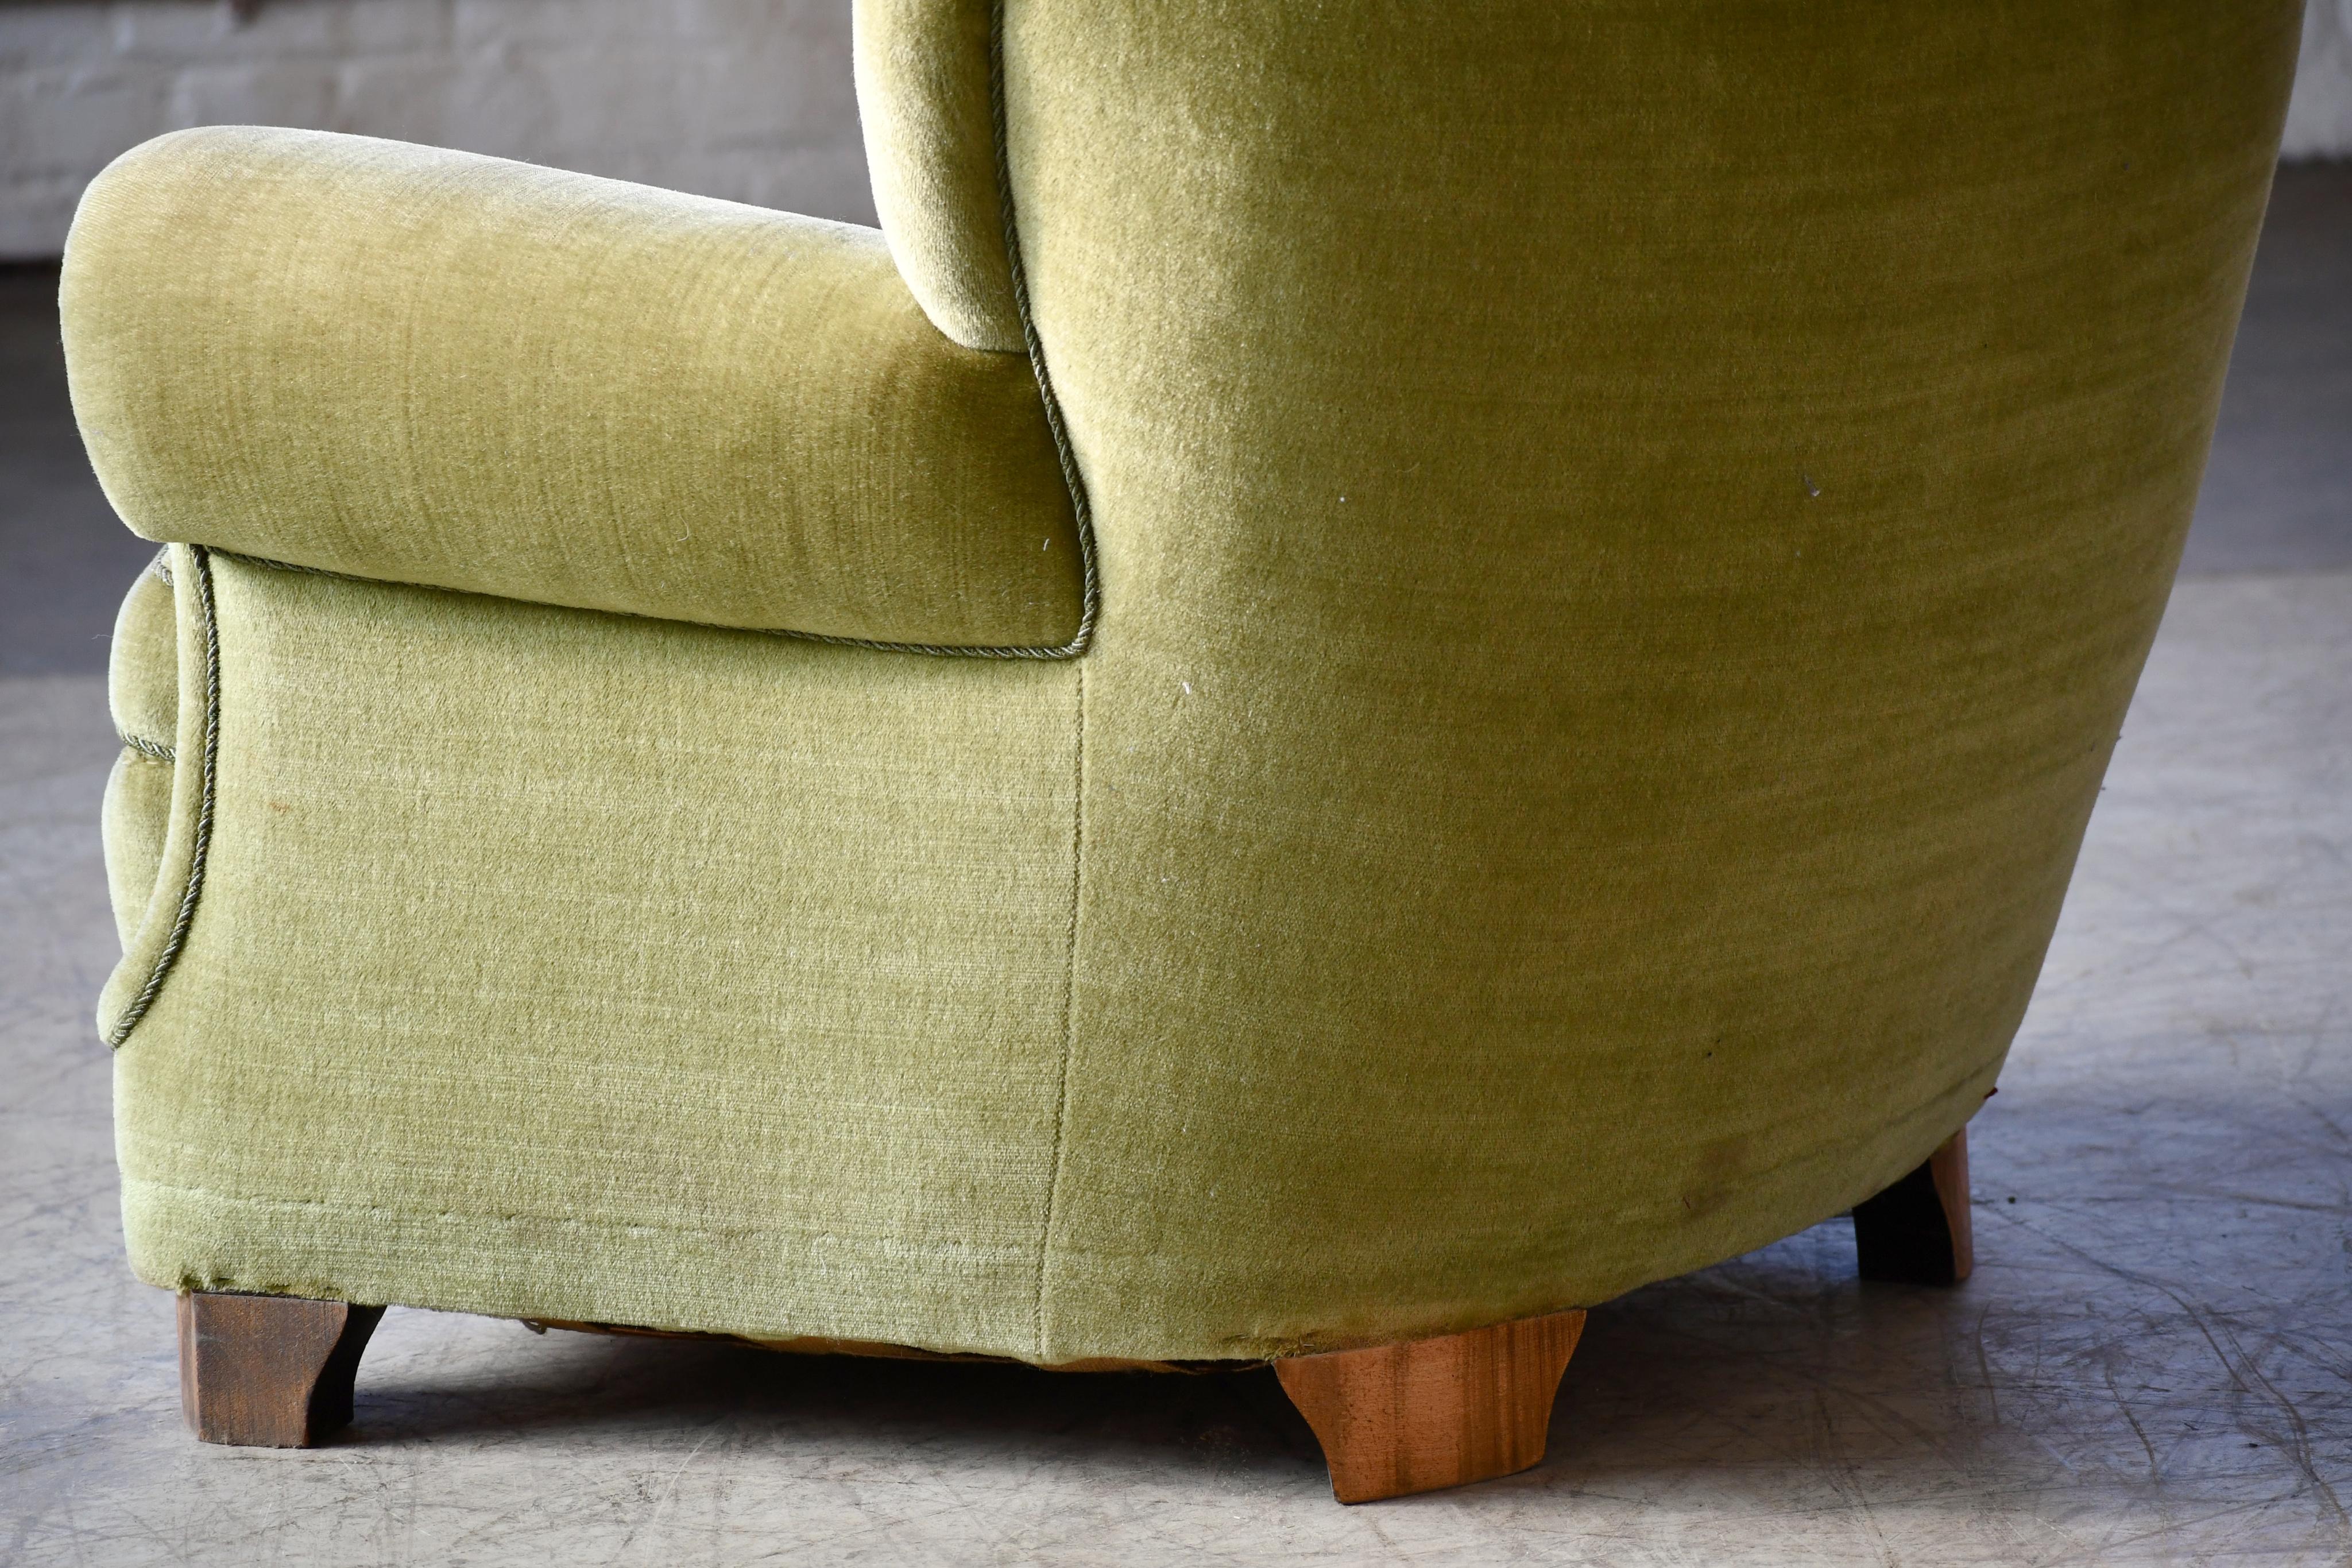 Mid-20th Century Danish Mid-Century Lounge or Club Chair in Green Mohair, 1940's